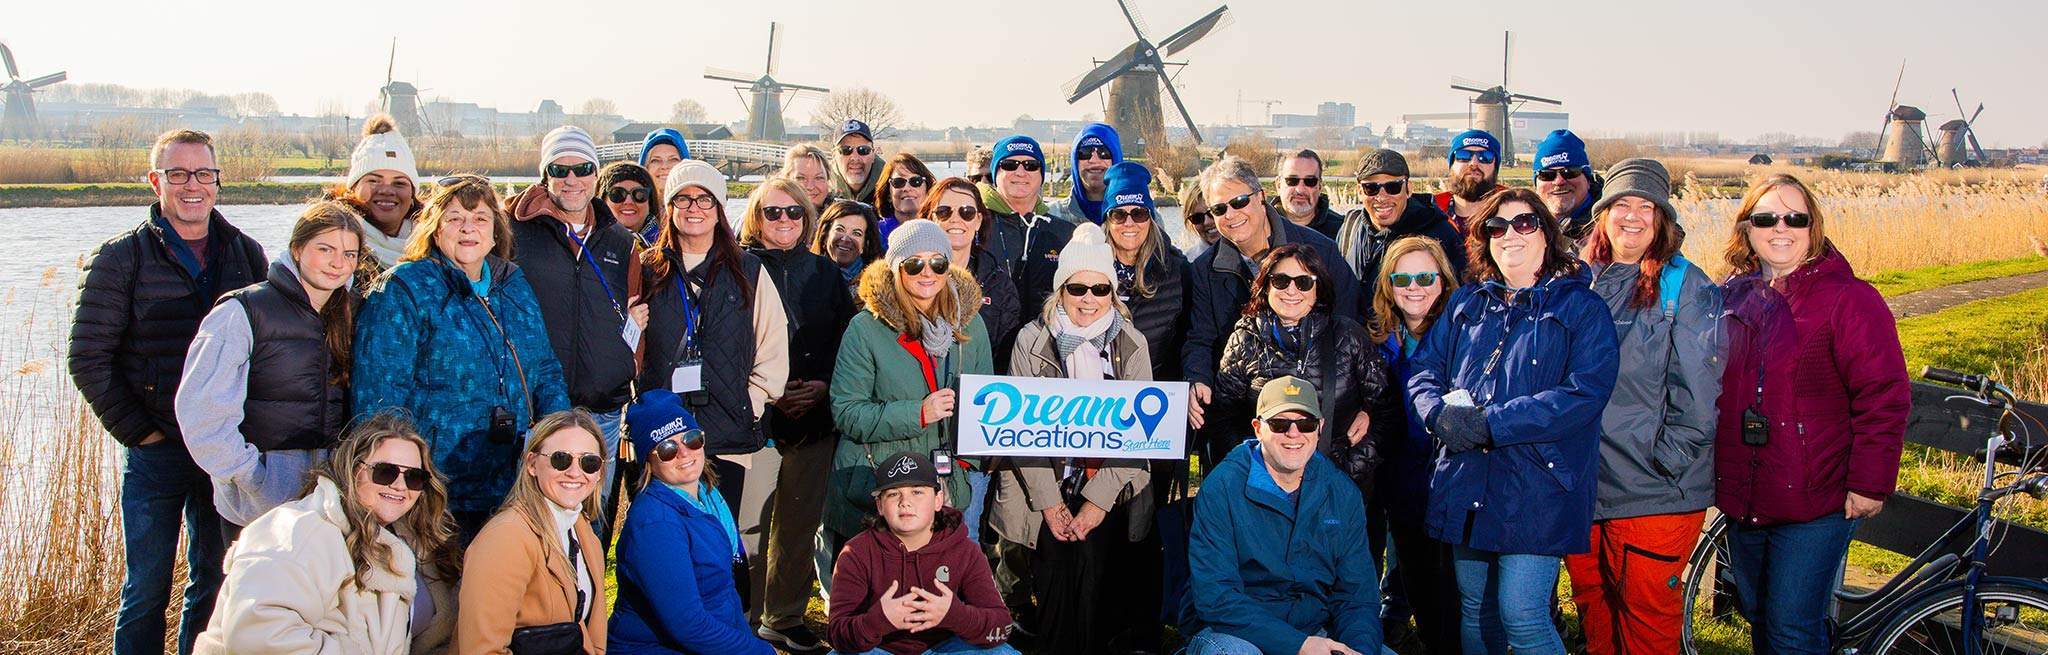 Dream Vacations franchisees outdoors near several windmills